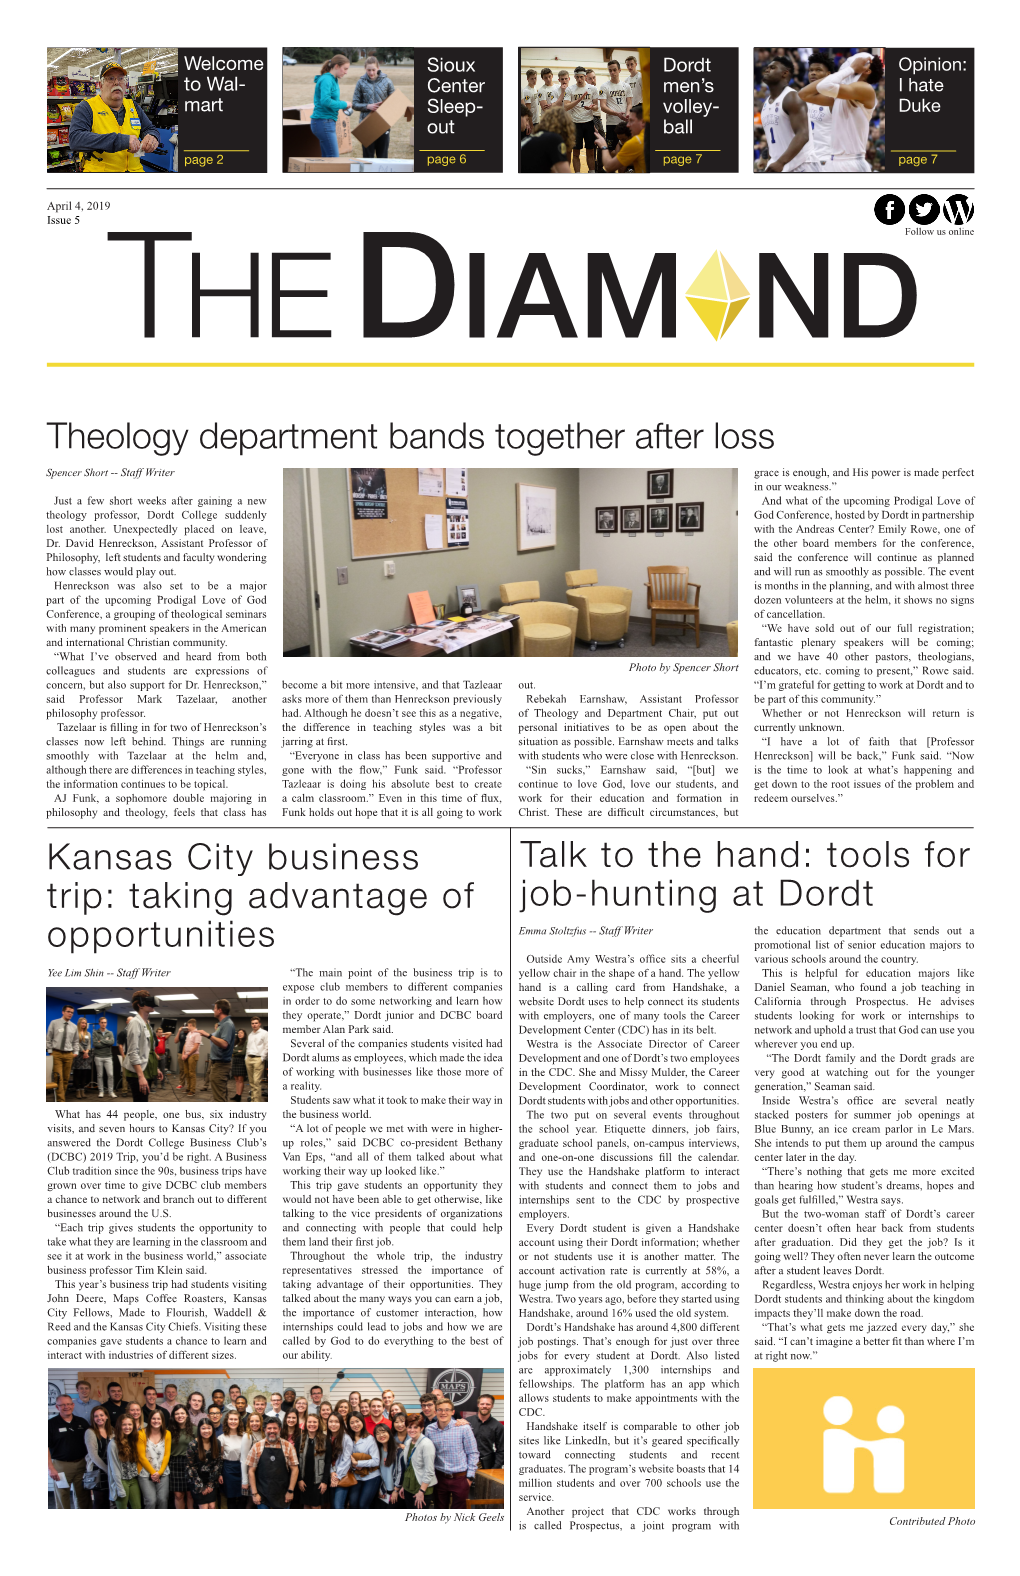 Tools for Job-Hunting at Dordt Theology Department Bands Together After